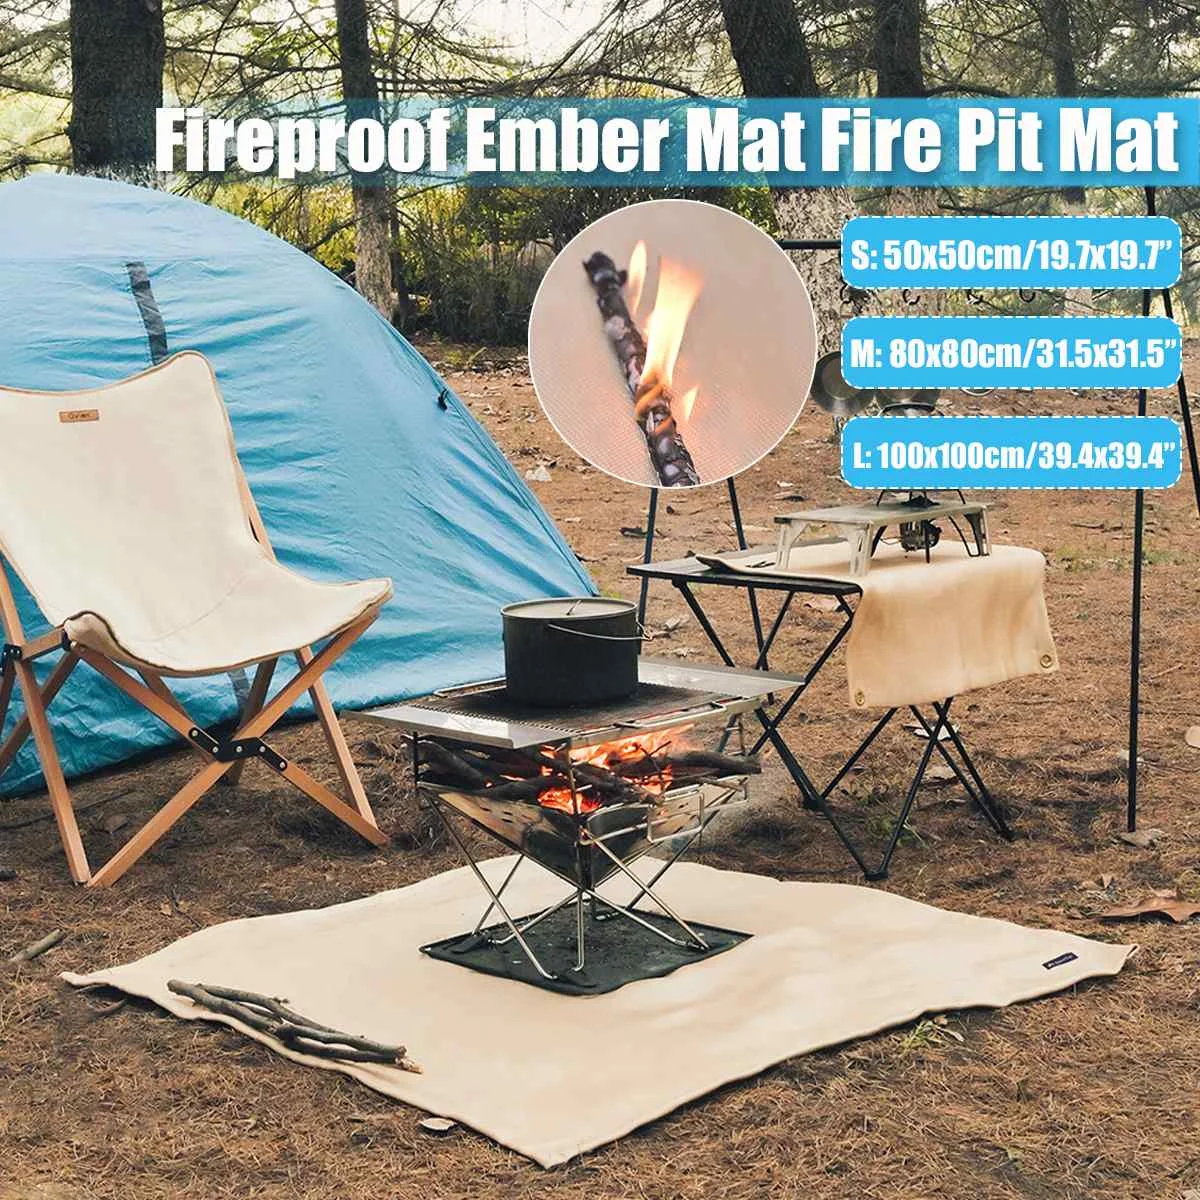 

Camping Fireproof Cloth Flame Retardant Insulation Mat Blanket Glass Coated Heat Insulation Pad Outdoors Picnic Barbecue